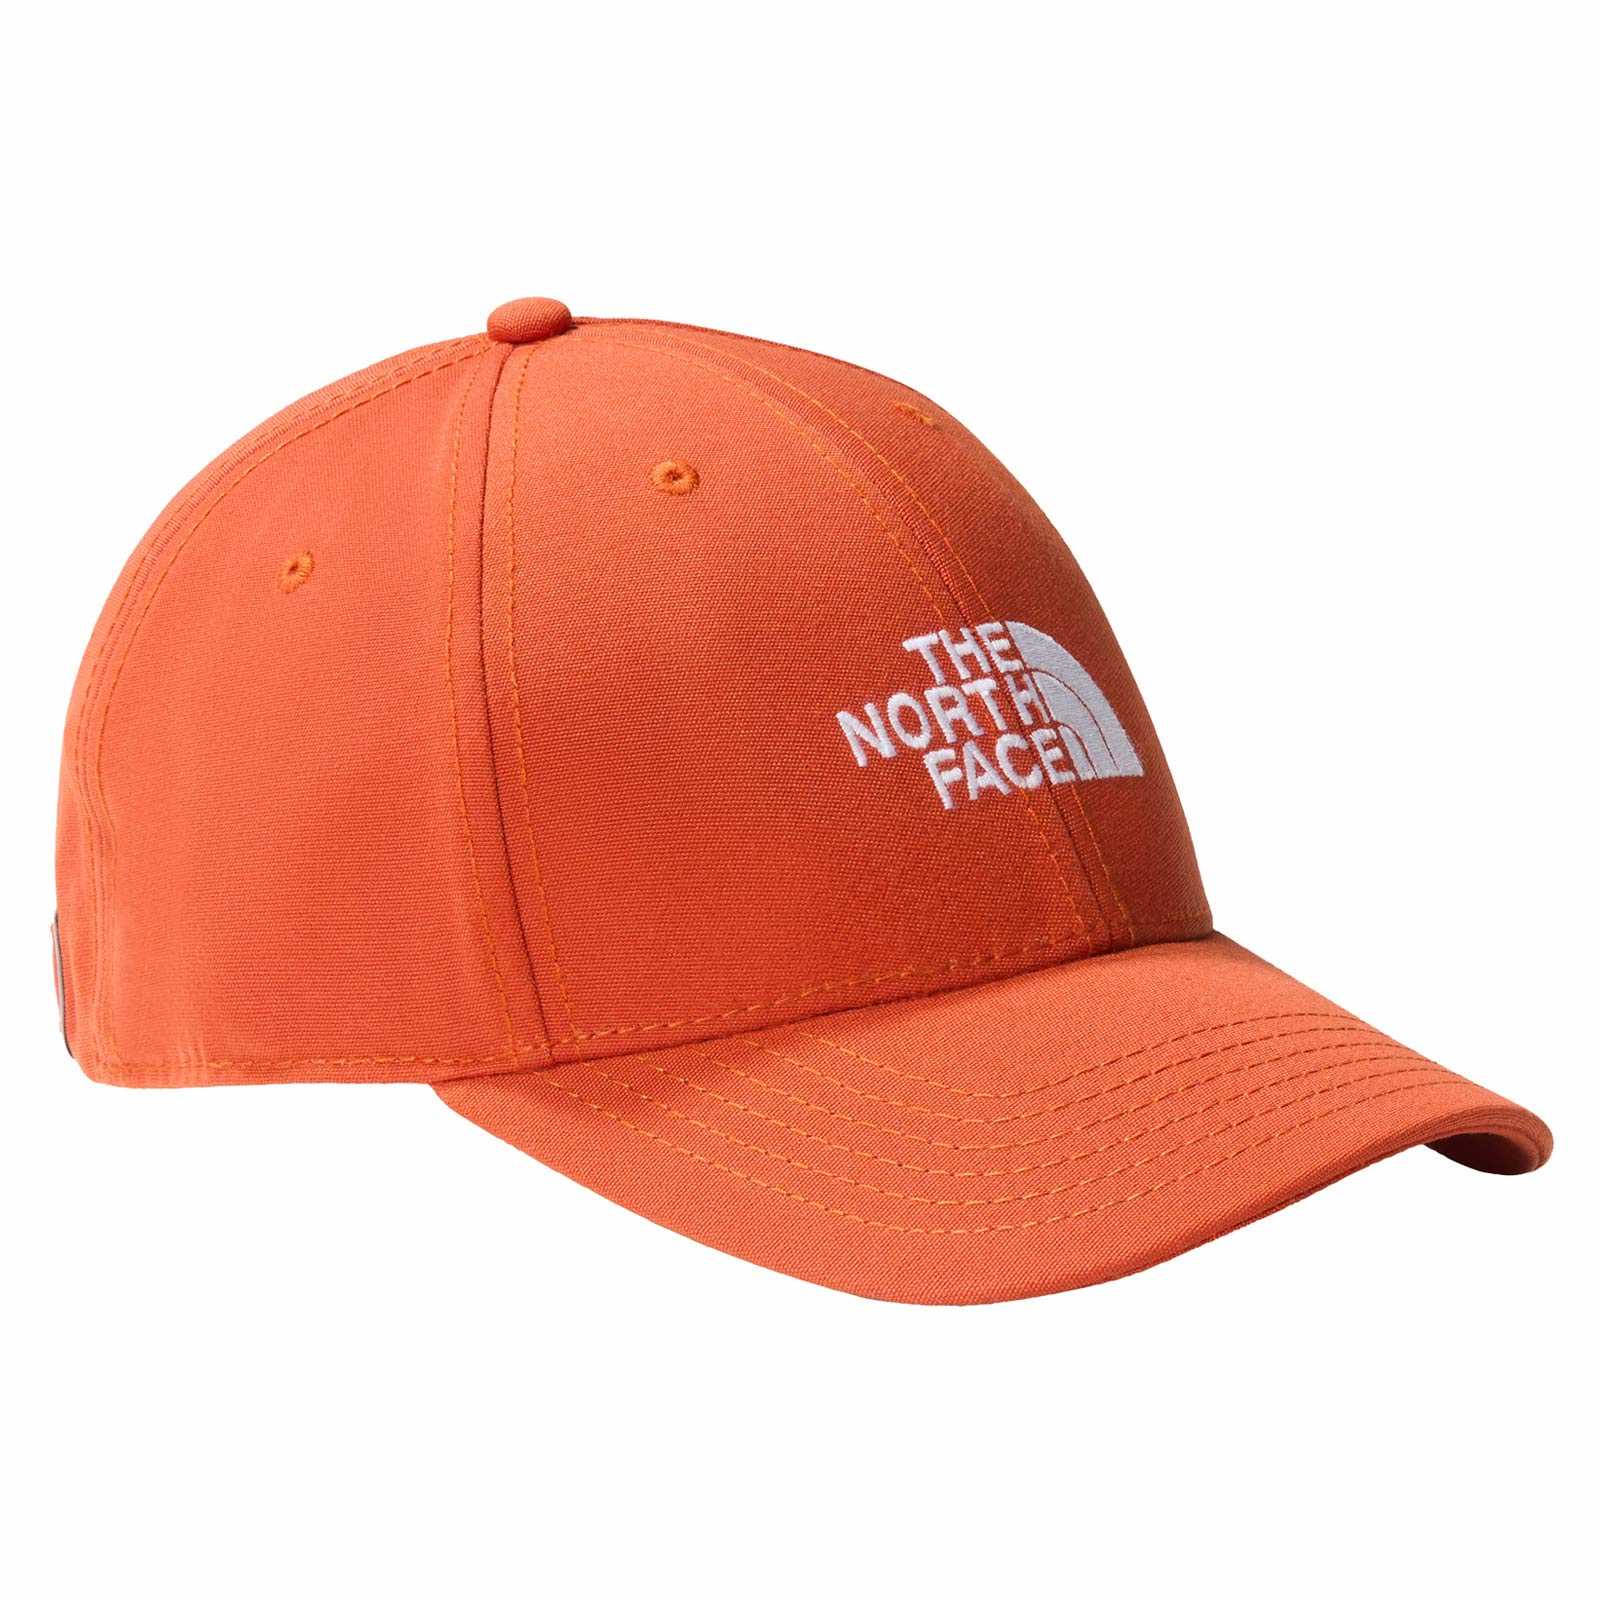 The North Face Recycled '66 Classic Hat | Caps & Hats | Accessories ...